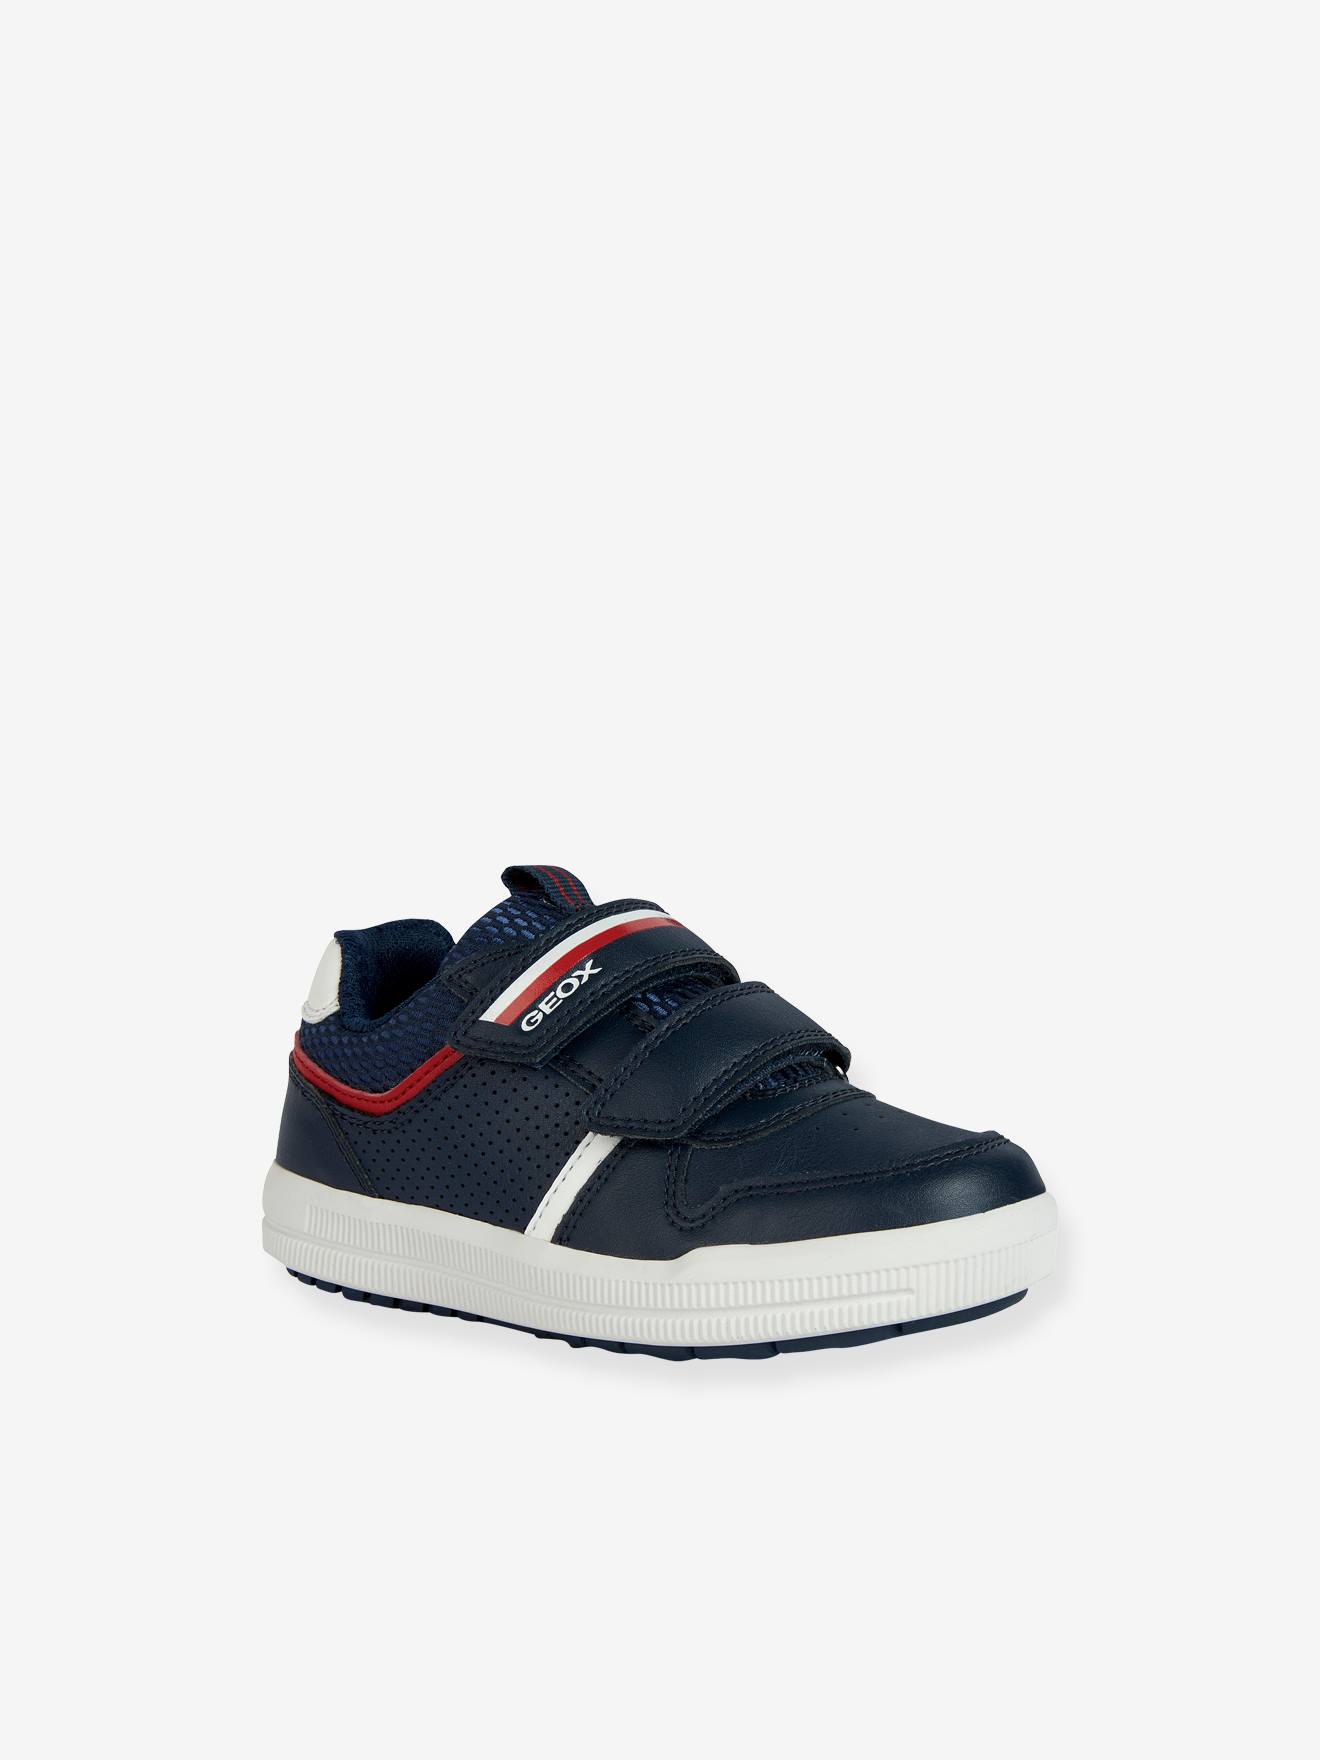 GEOX J ARZACH BOY A Sneakers - NAVY/RED - Maat 27